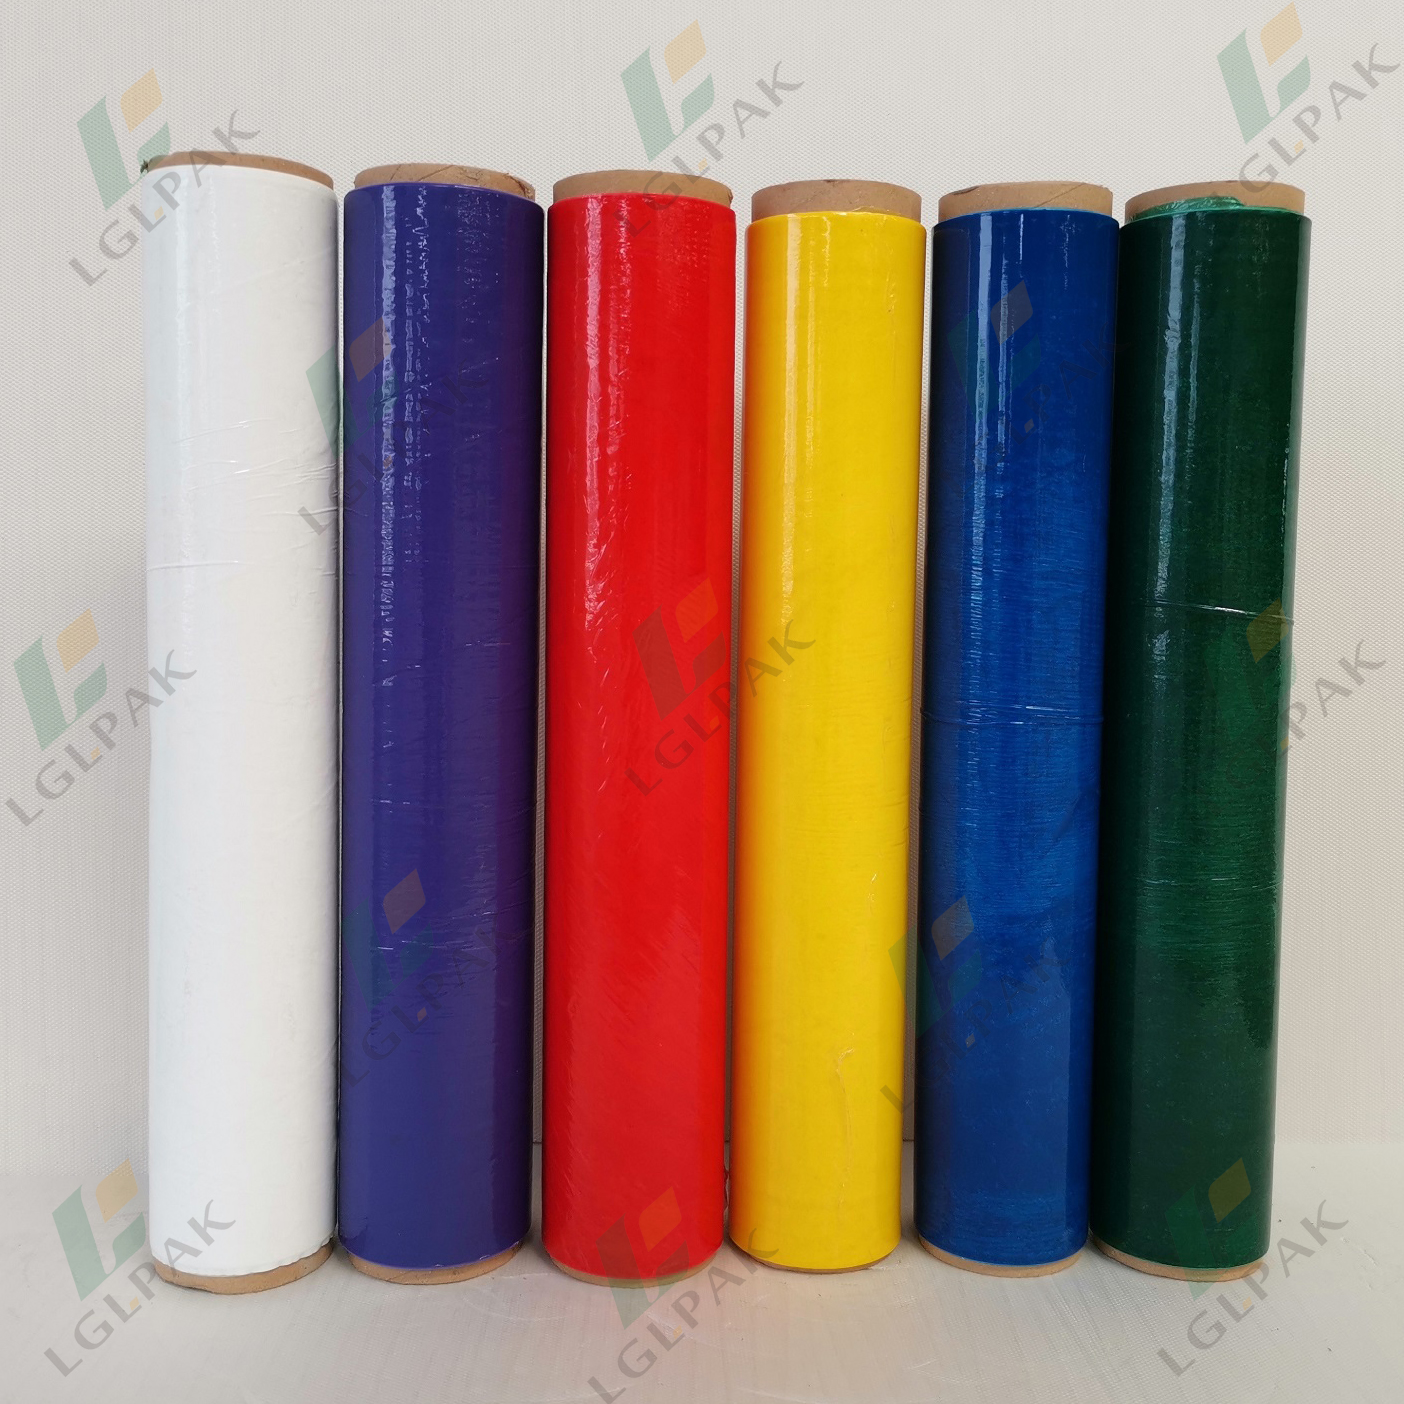 stretch film in Different colors)